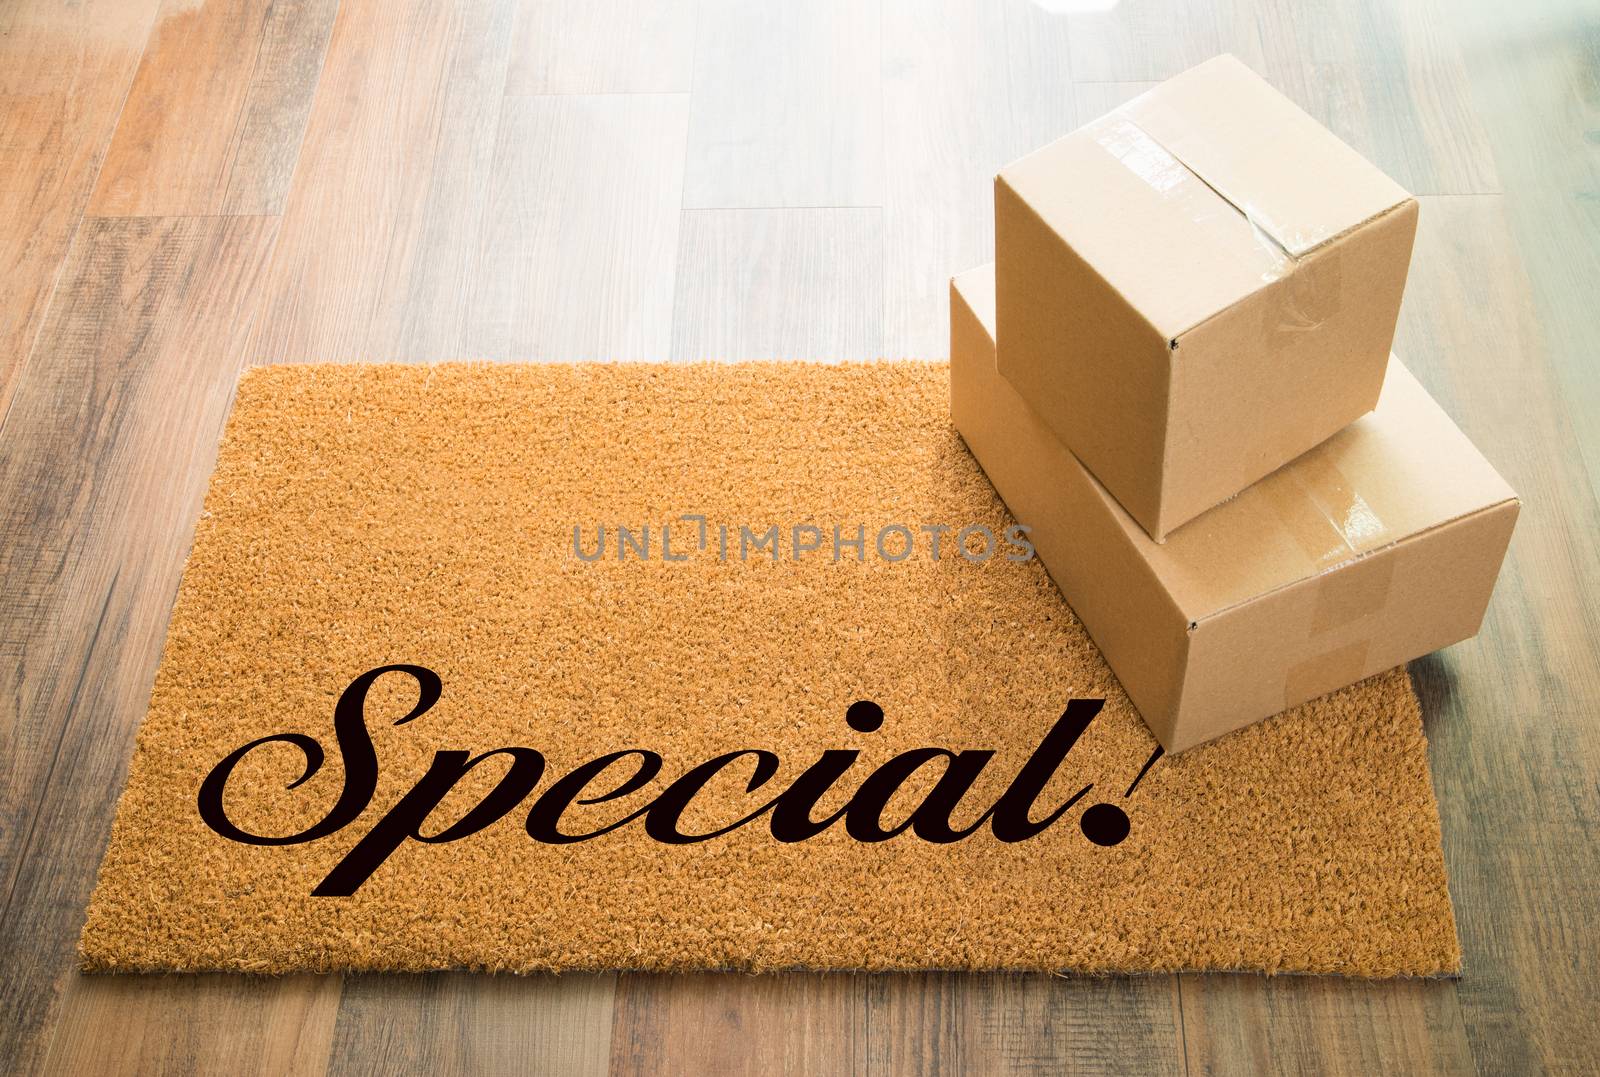 Special Welcome Mat On Wood Floor With Shipment of Boxes by Feverpitched